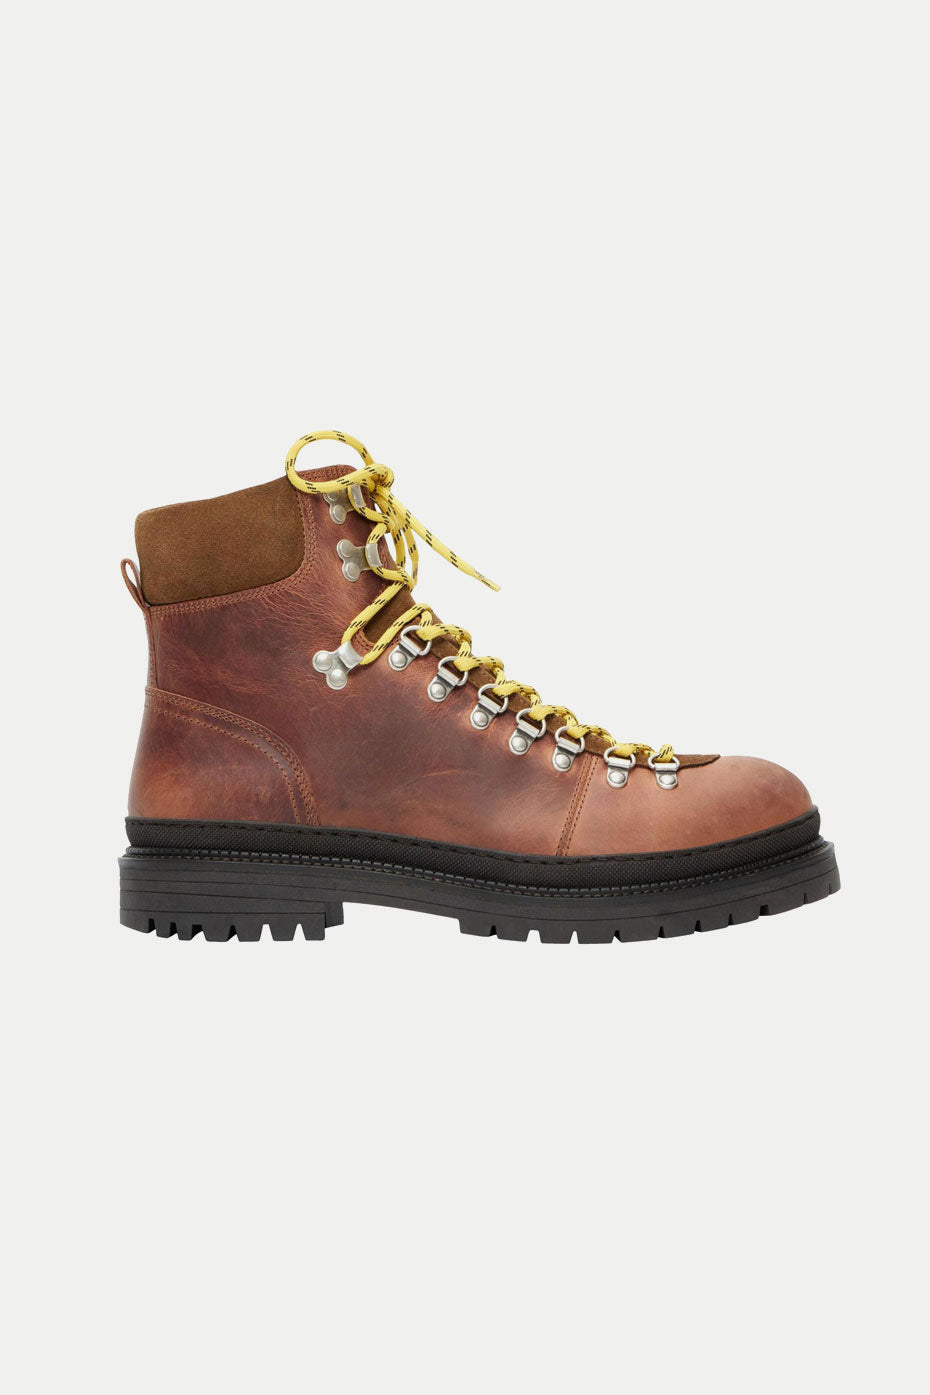 Selected Homme Cognac Landon Leather Hiking Boot